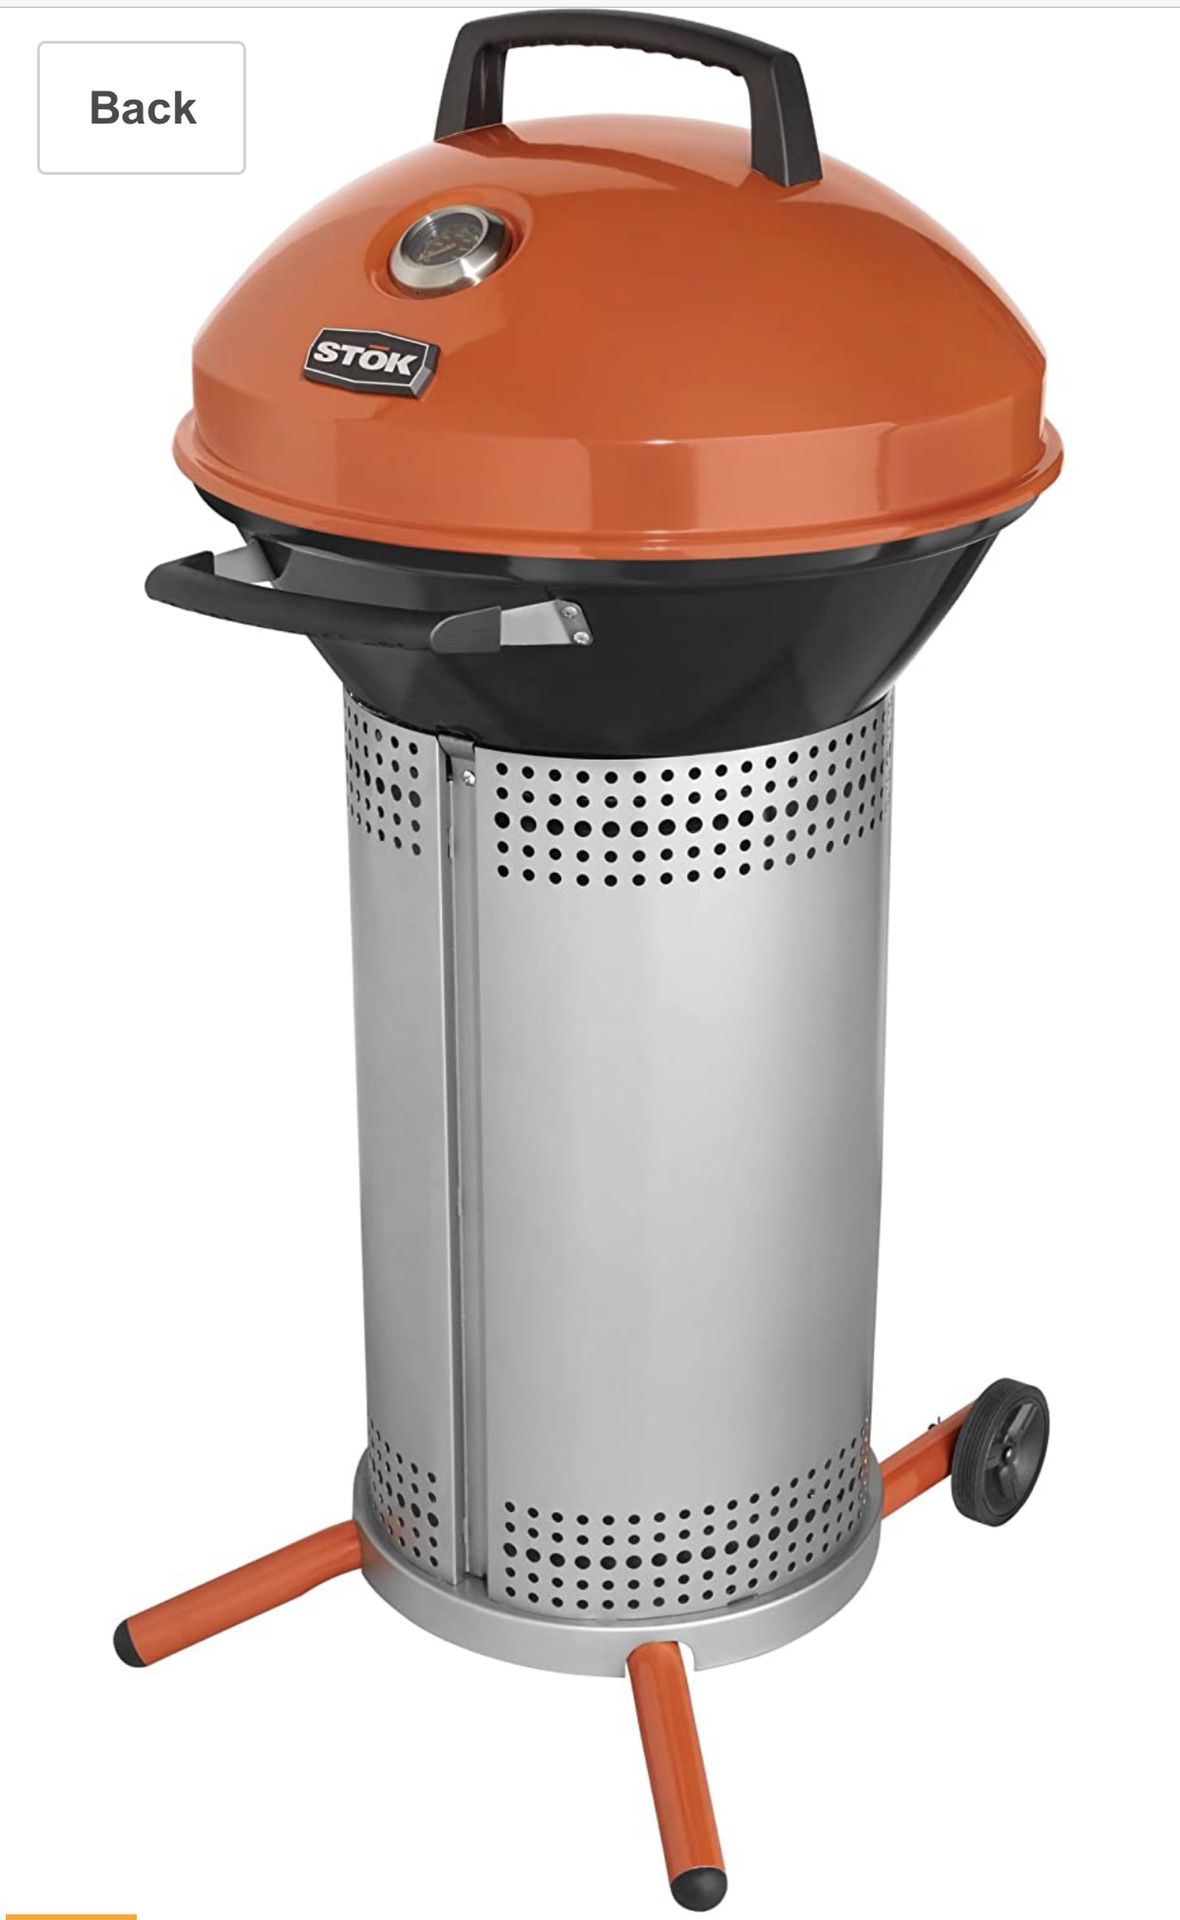 Stok Tower Charcoal Grill Brand New